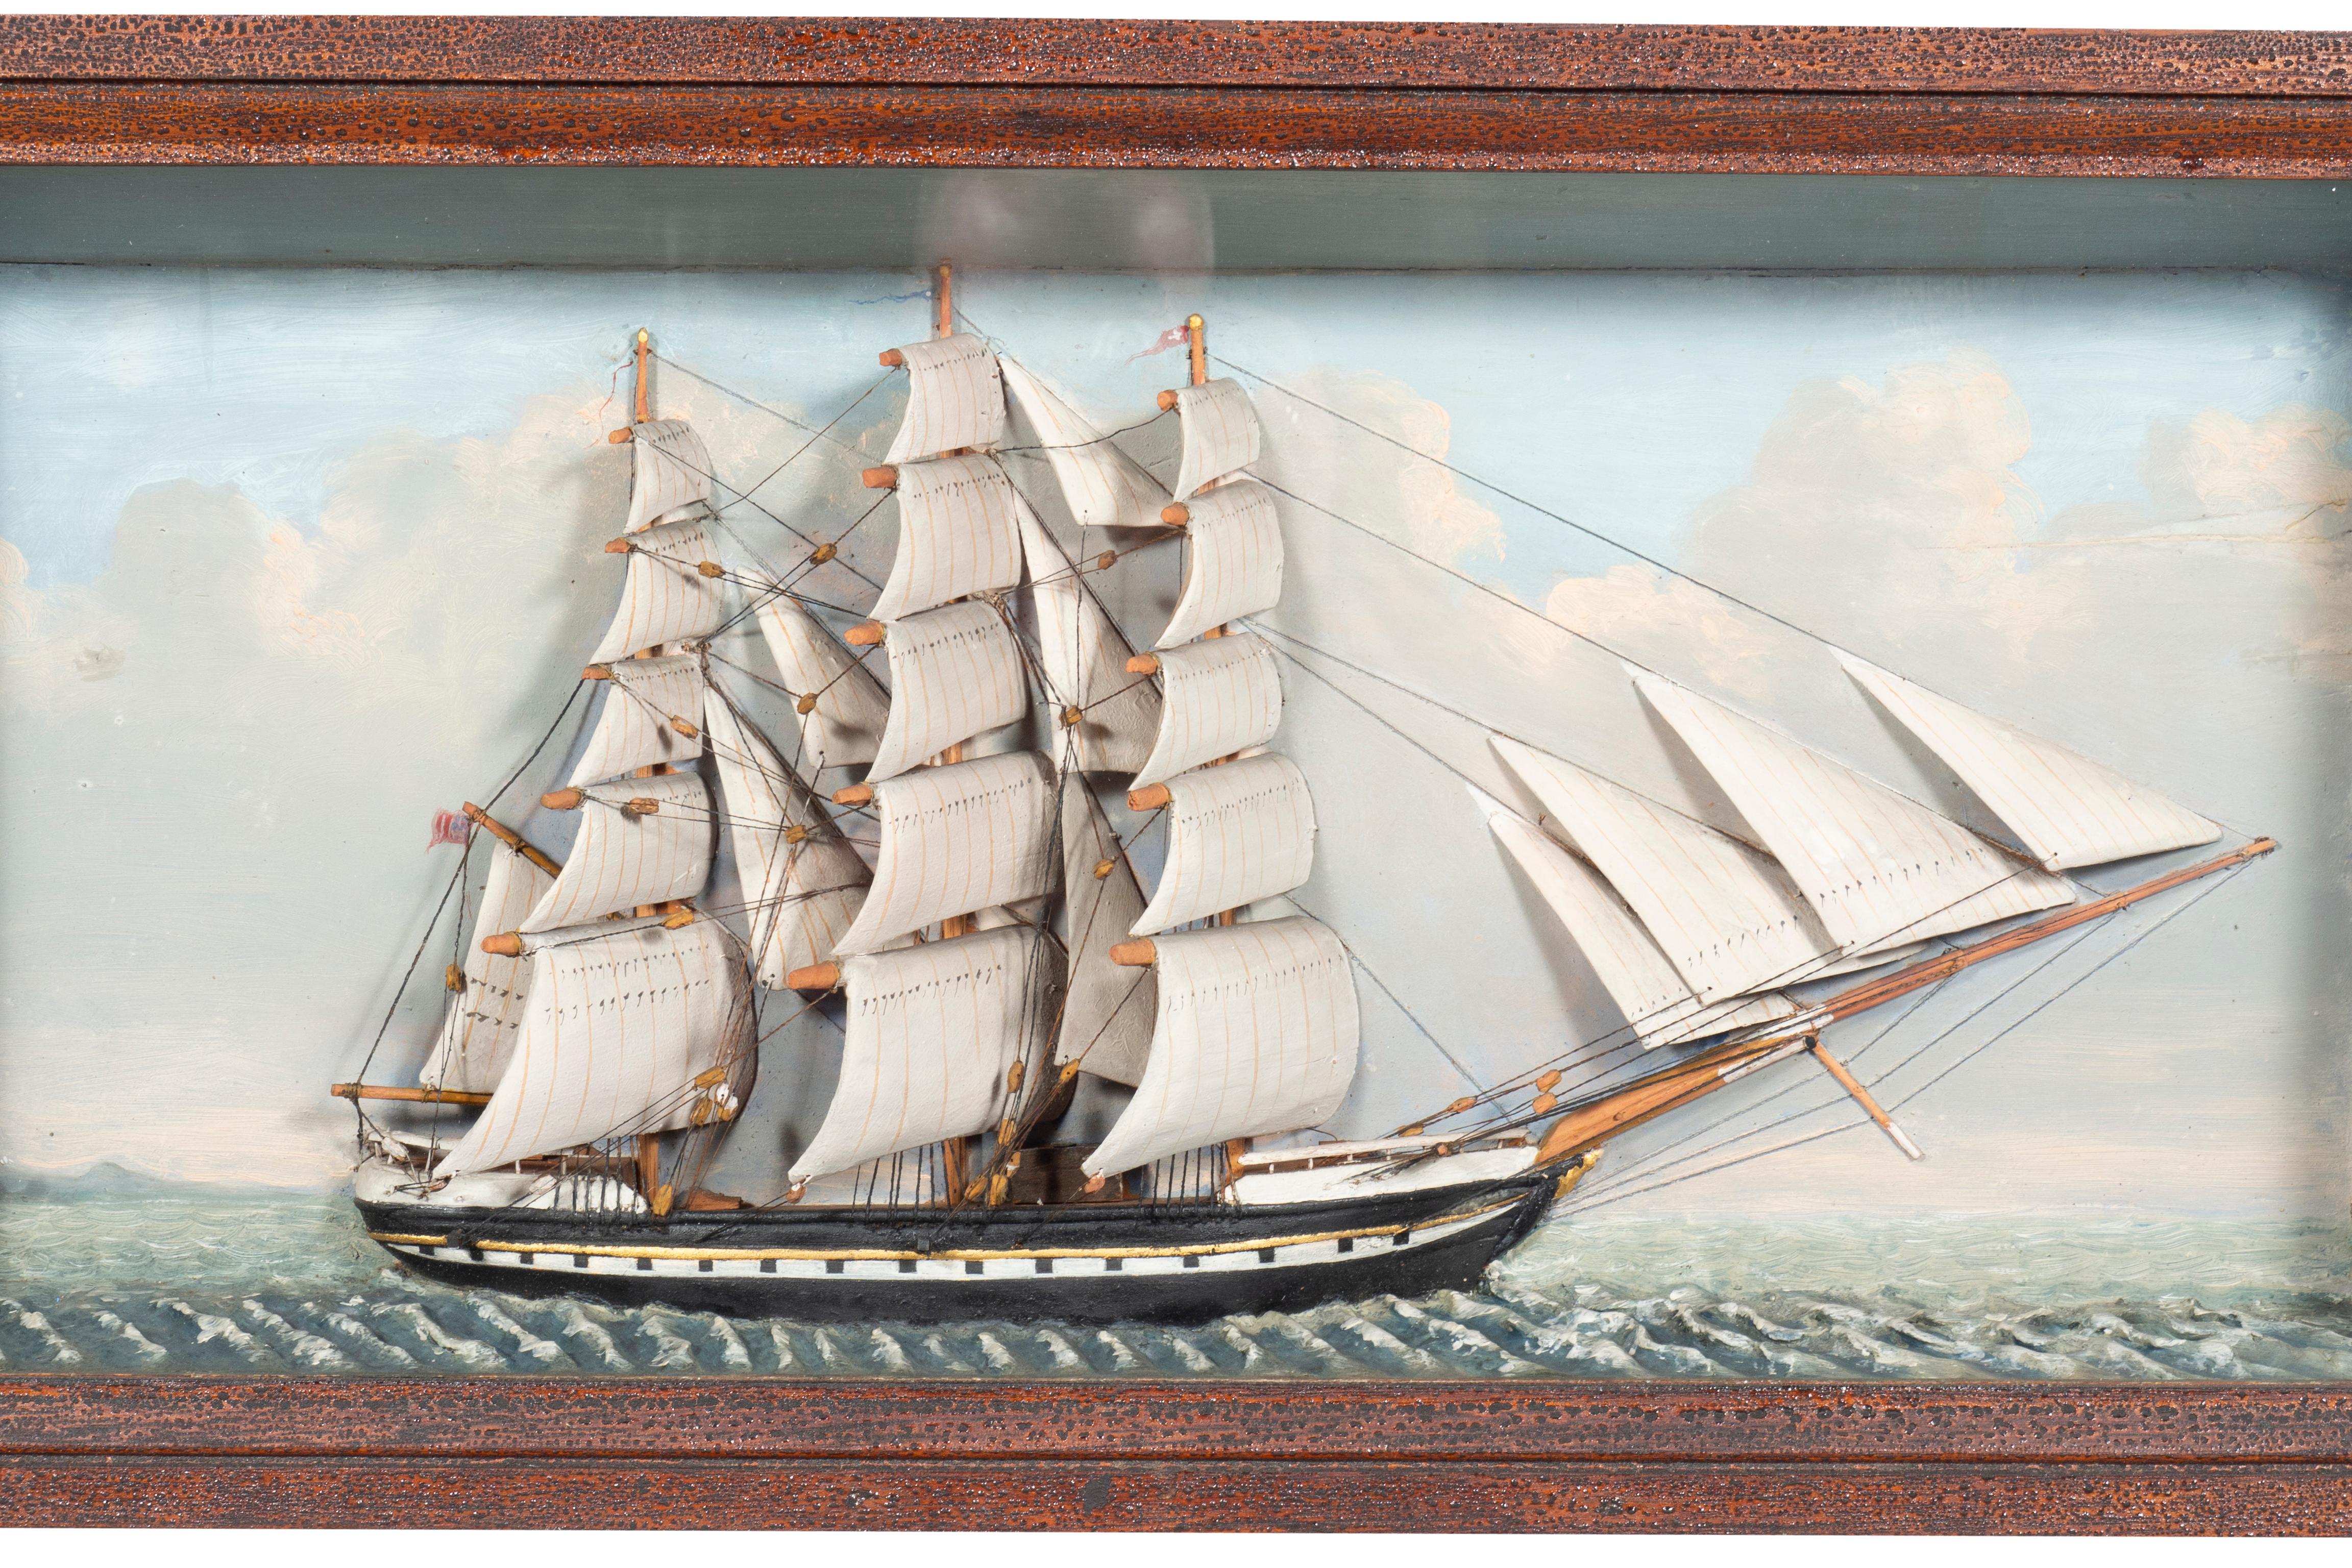 A good size and well painted with a large clipper ship. Dioramas are 1/2 models set in a seascape in a glass fronted case.